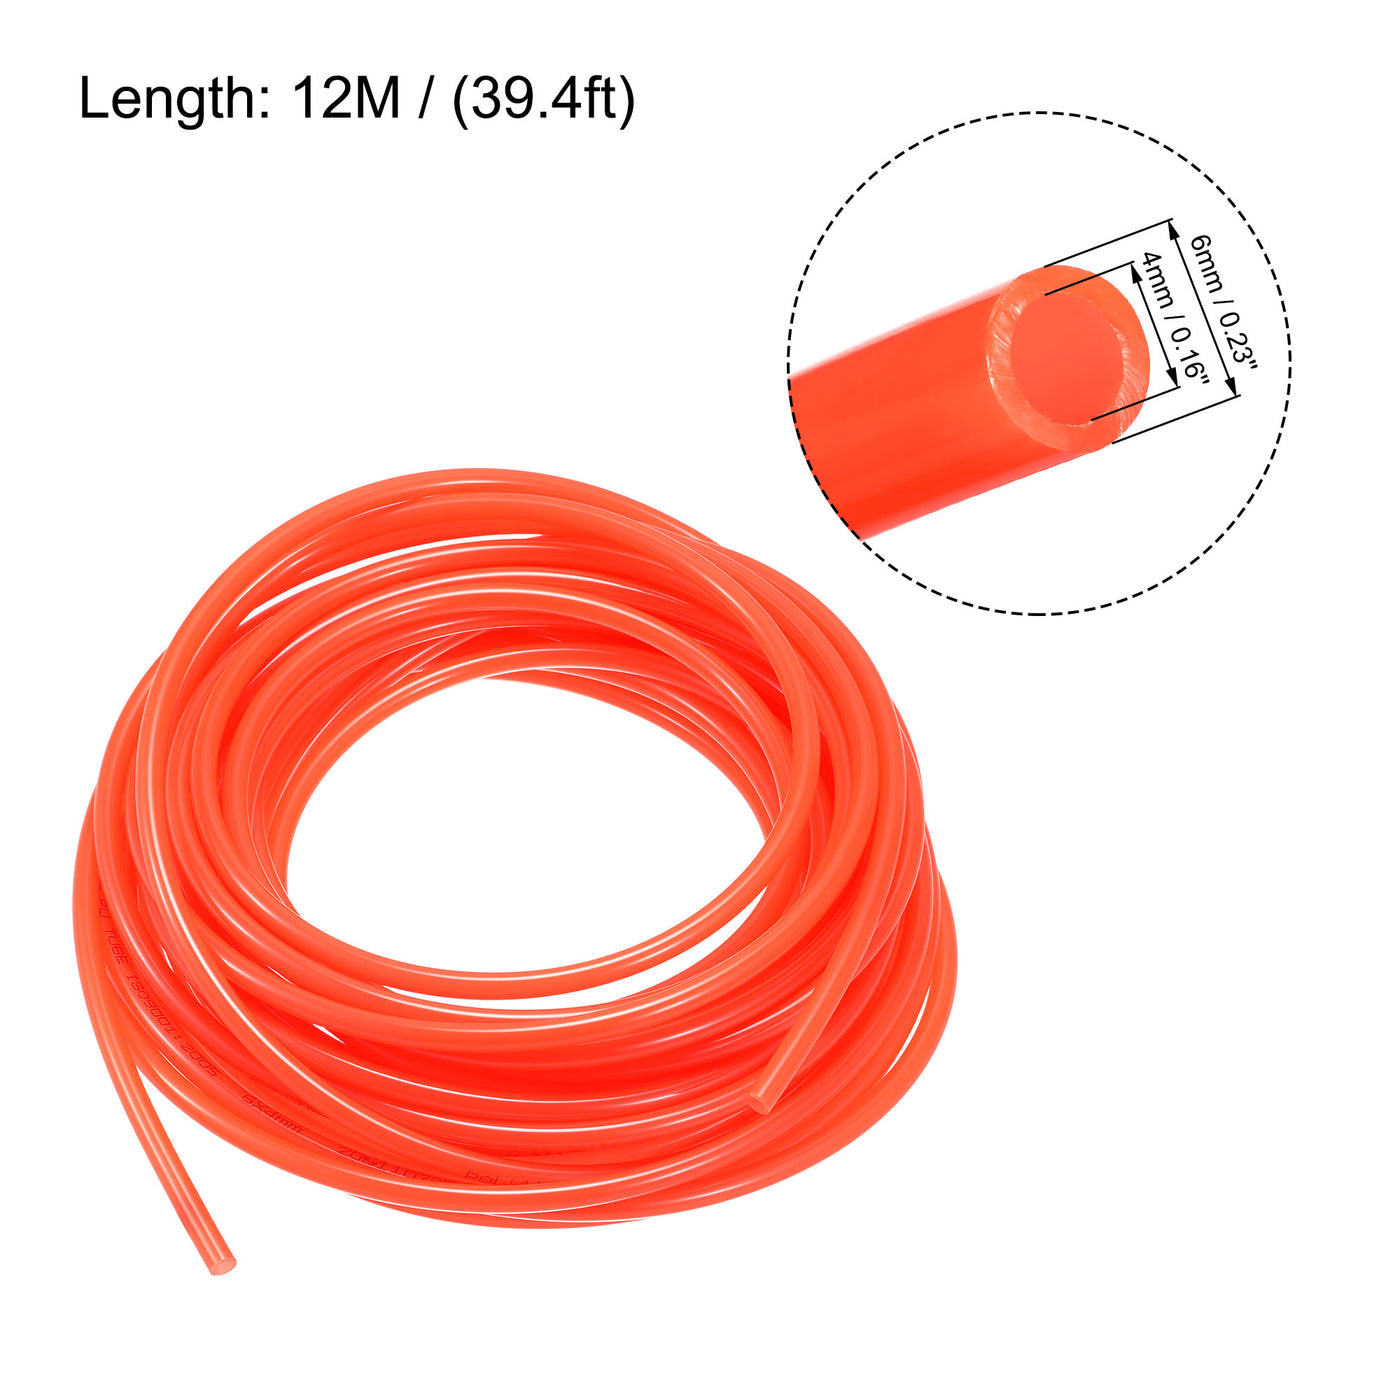 uxcell Uxcell Pneumatic Air Hose Tubing Air Compressor Tube 4mm/0.16''ID x 6mm/0.23''OD x 12m/39.4Ft Polyurethane Pipe Bright Orange